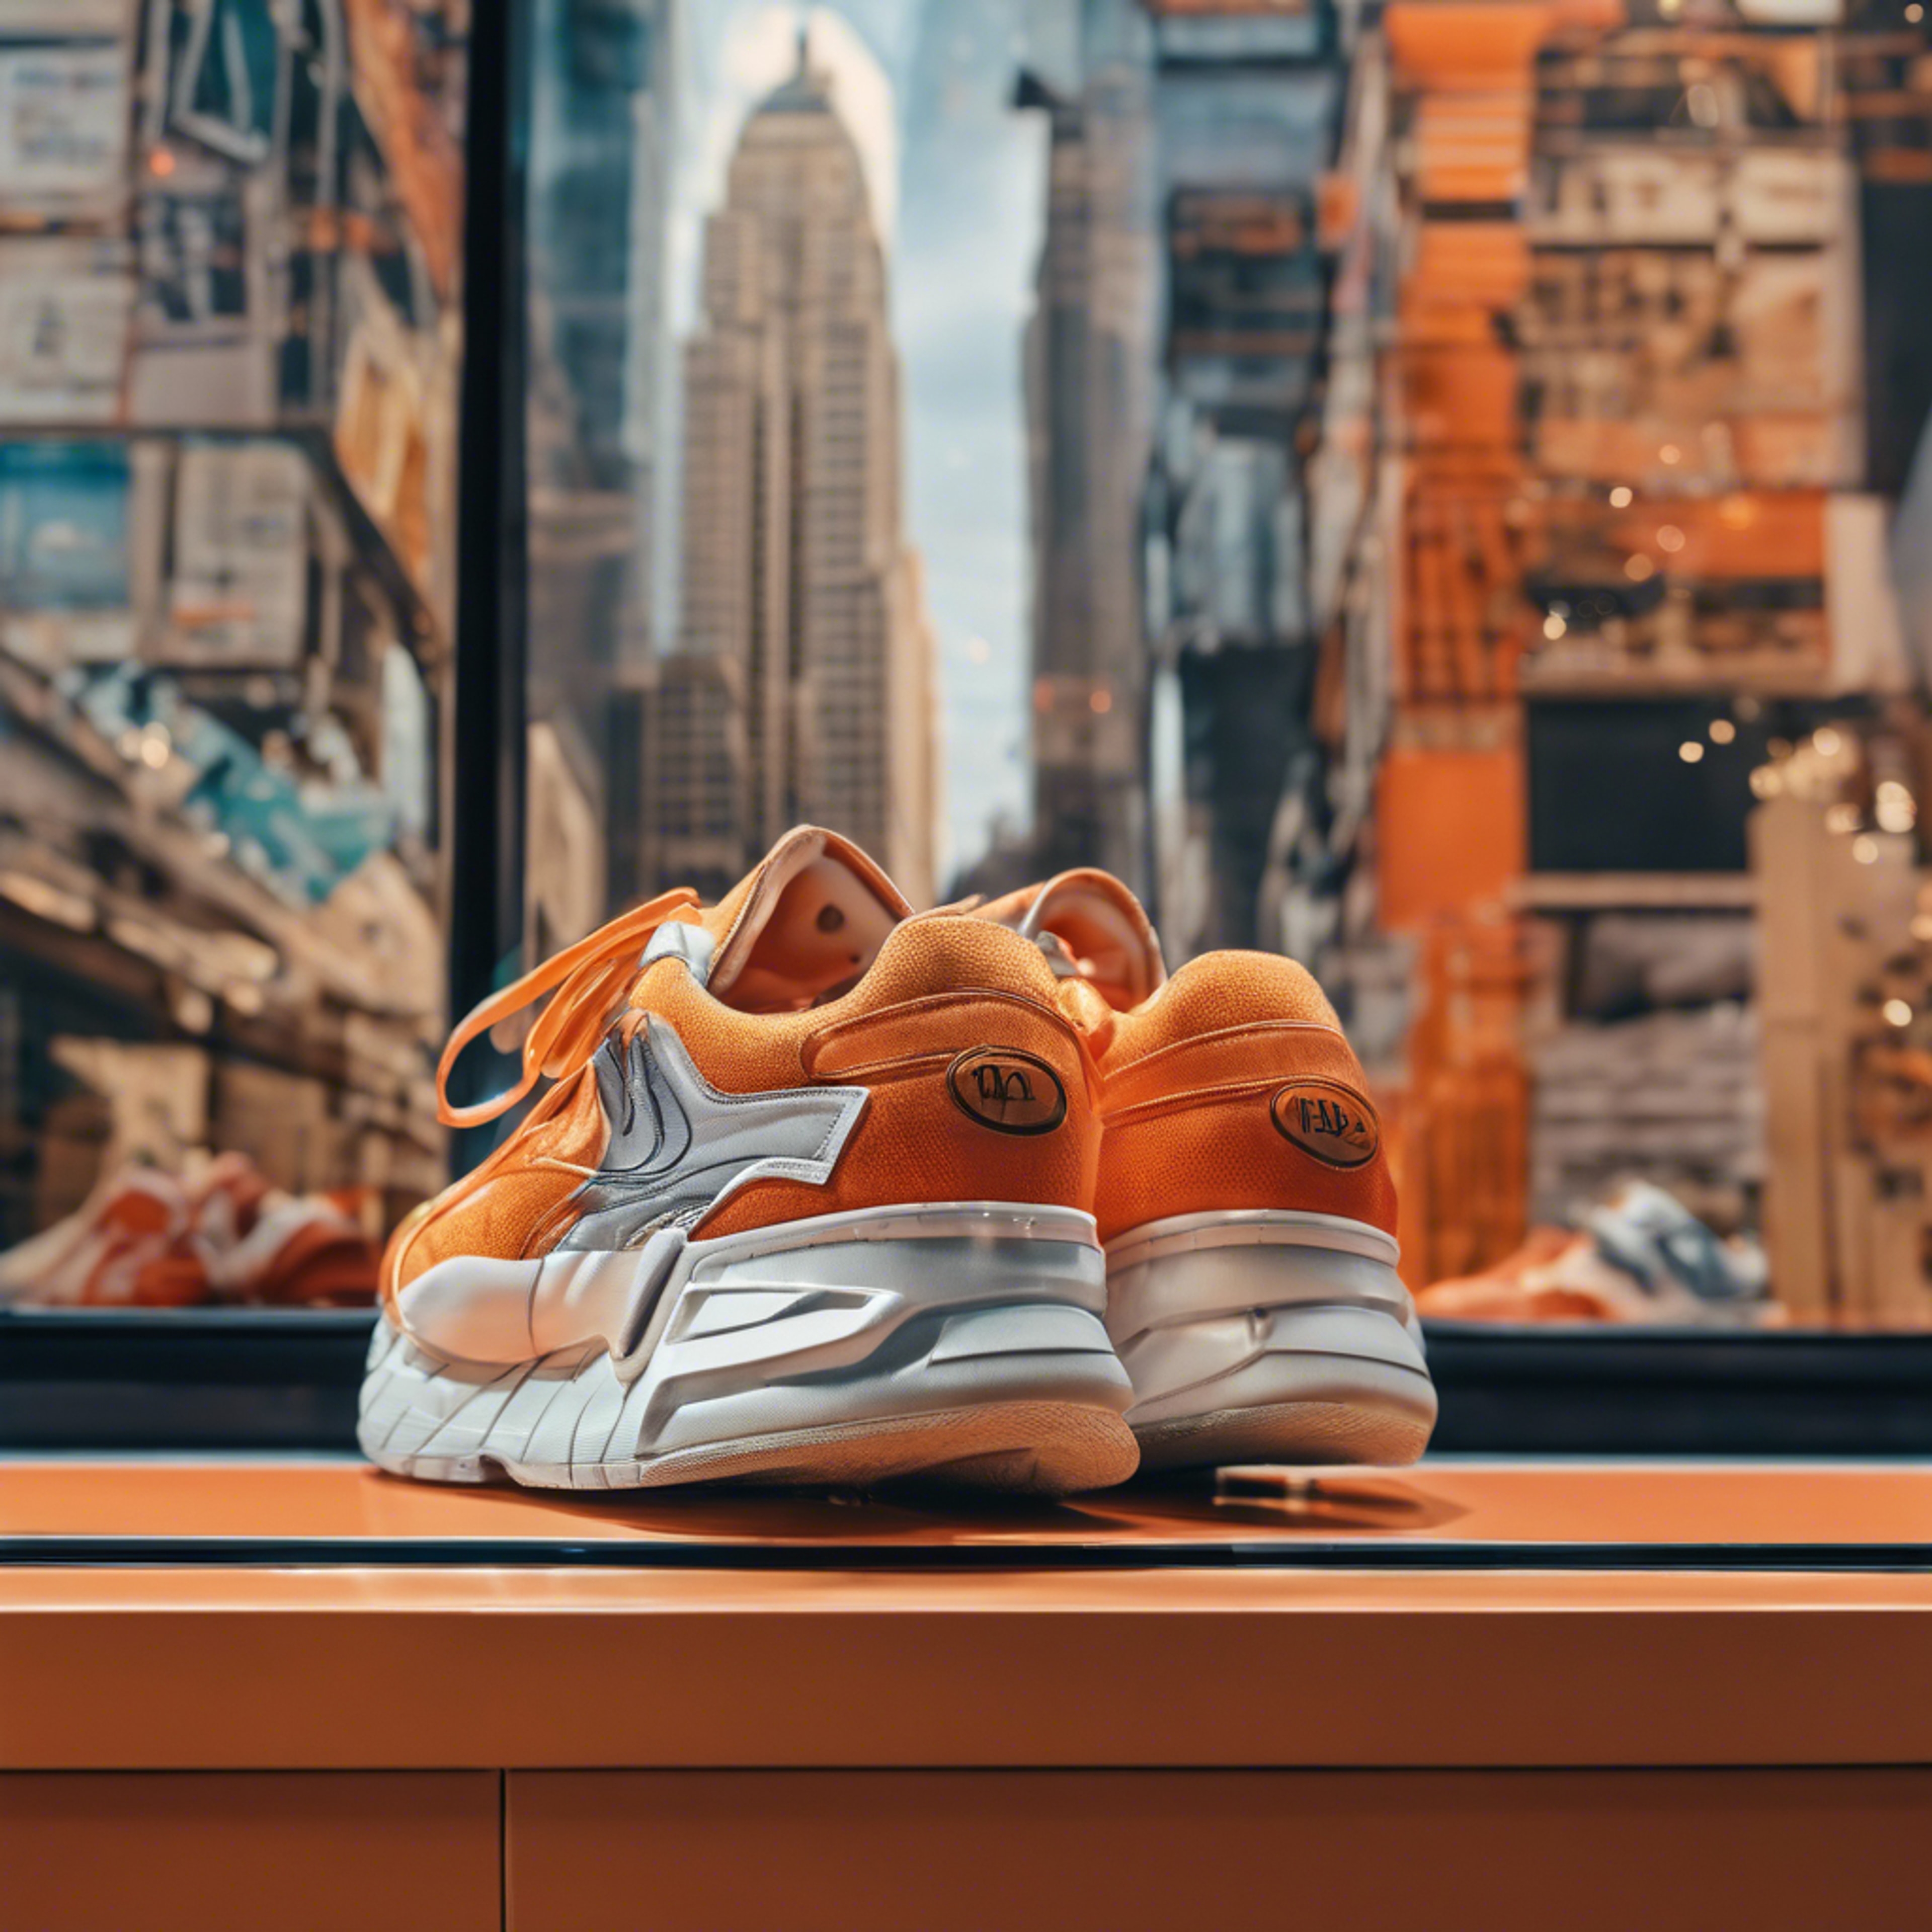 Orange Y2K-inspired sneakers displayed in a shoe store window with a retro cityscape backdrop. 벽지[c42ef01953ac4184b365]